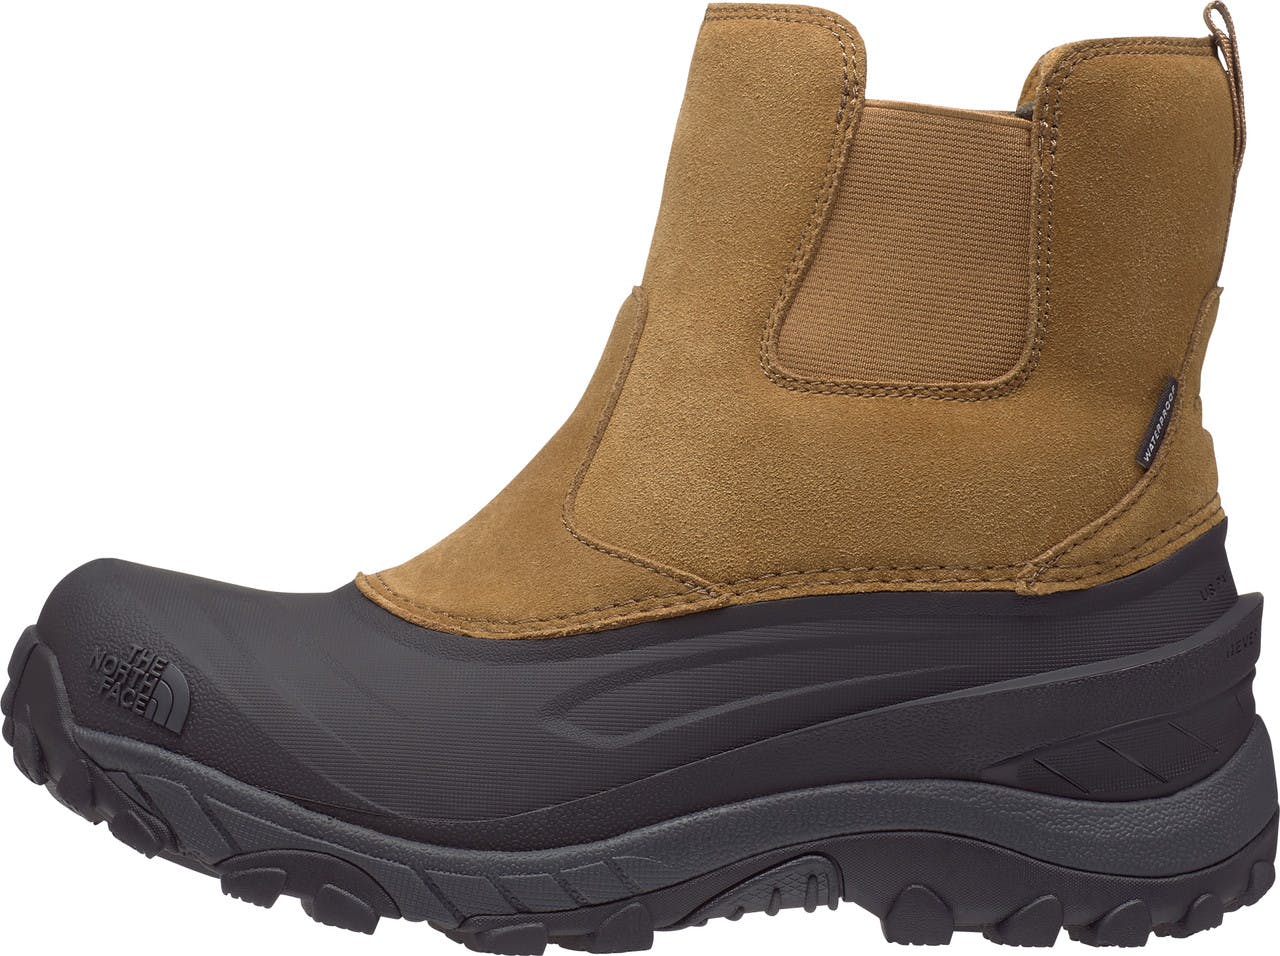 Chilkat IV Pull-On Winter Boots Utility Brown/TNF Black